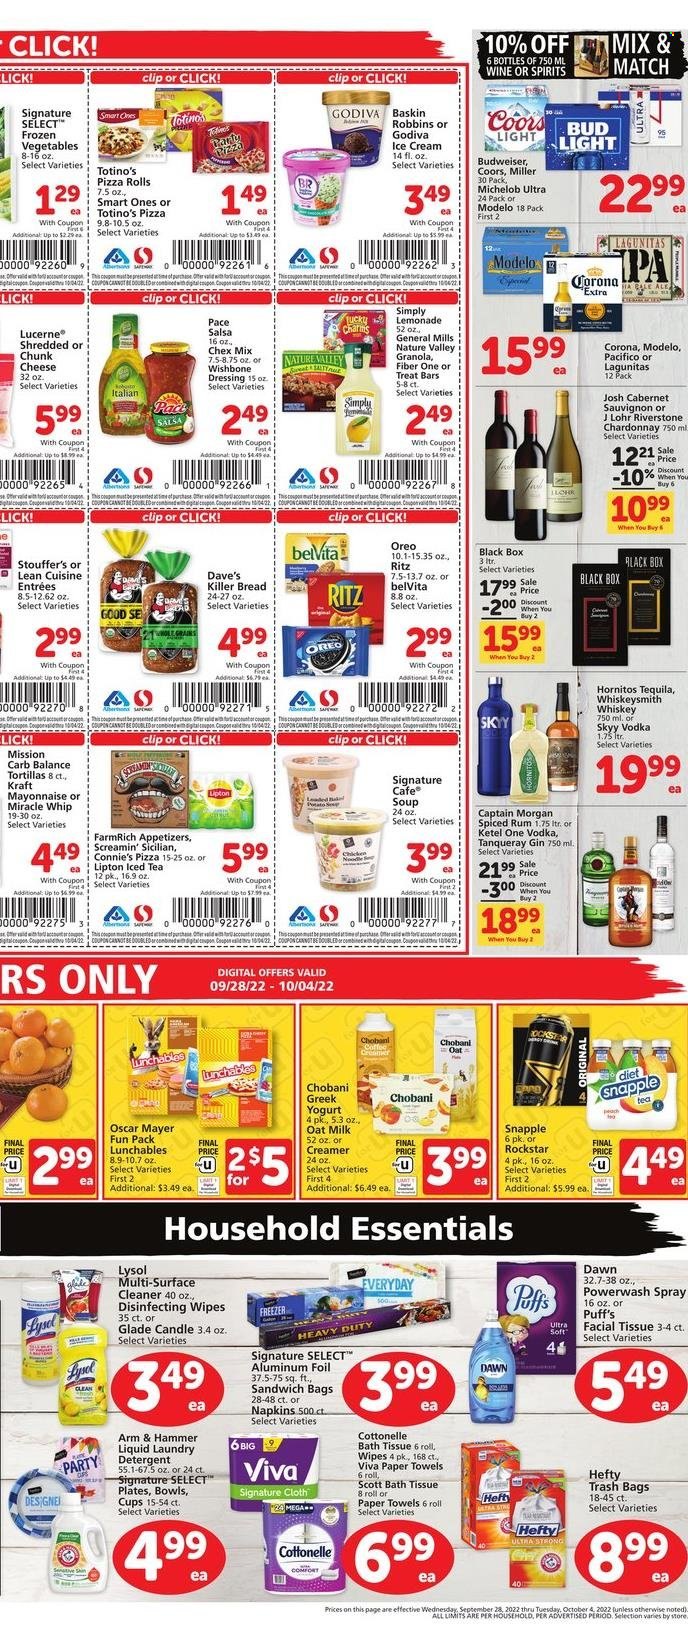 thumbnail - Safeway Flyer - 09/28/2022 - 10/04/2022 - Sales products - bread, tortillas, pizza rolls, pizza, soup, Lean Cuisine, Lunchables, Kraft®, Oscar Mayer, chunk cheese, greek yoghurt, Oreo, yoghurt, Chobani, milk, oat milk, creamer, mayonnaise, Miracle Whip, ice cream, Stouffer's, Screamin' Sicilian, Godiva, RITZ, Chex Mix, ARM & HAMMER, granola, belVita, Nature Valley, Fiber One, dressing, salsa, lemonade, Lipton, ice tea, Snapple, Rockstar, Cabernet Sauvignon, red wine, white wine, Chardonnay, wine, Captain Morgan, gin, rum, spiced rum, tequila, vodka, whiskey, SKYY, whisky, beer, Bud Light, Corona Extra, Miller, IPA, Modelo, bath tissue, Cottonelle, Scott, wipes, napkins, kitchen towels, paper towels, detergent, surface cleaner, cleaner, Lysol, bag, Hefty, trash bags, plate, cup, aluminium foil, candle, Glade, Budweiser, Coors, Michelob. Page 3.